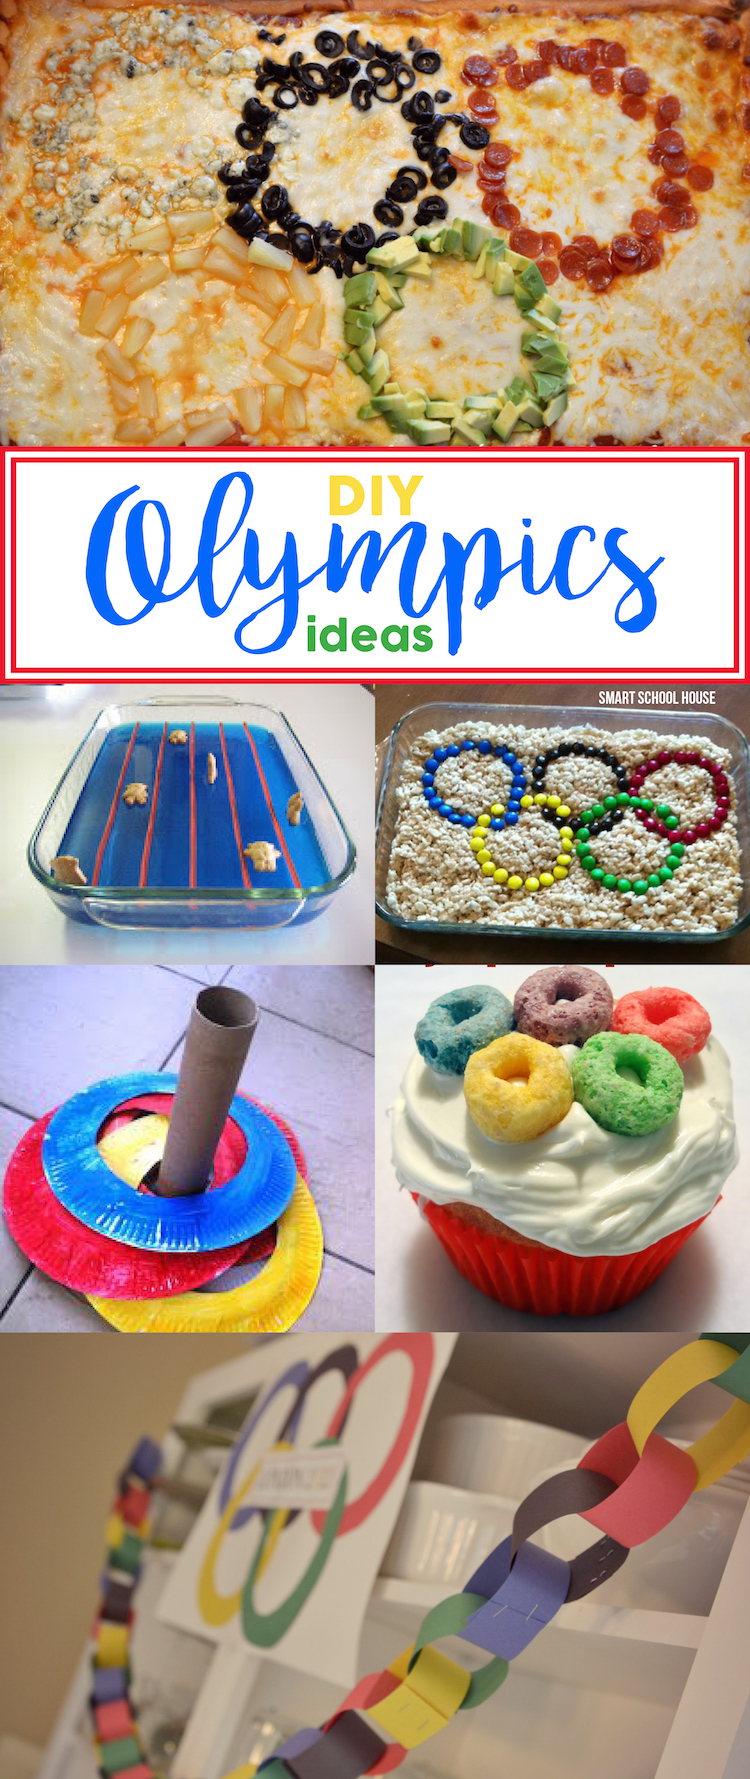 Olympics Ideas - Page 10 of 11 - Smart School House